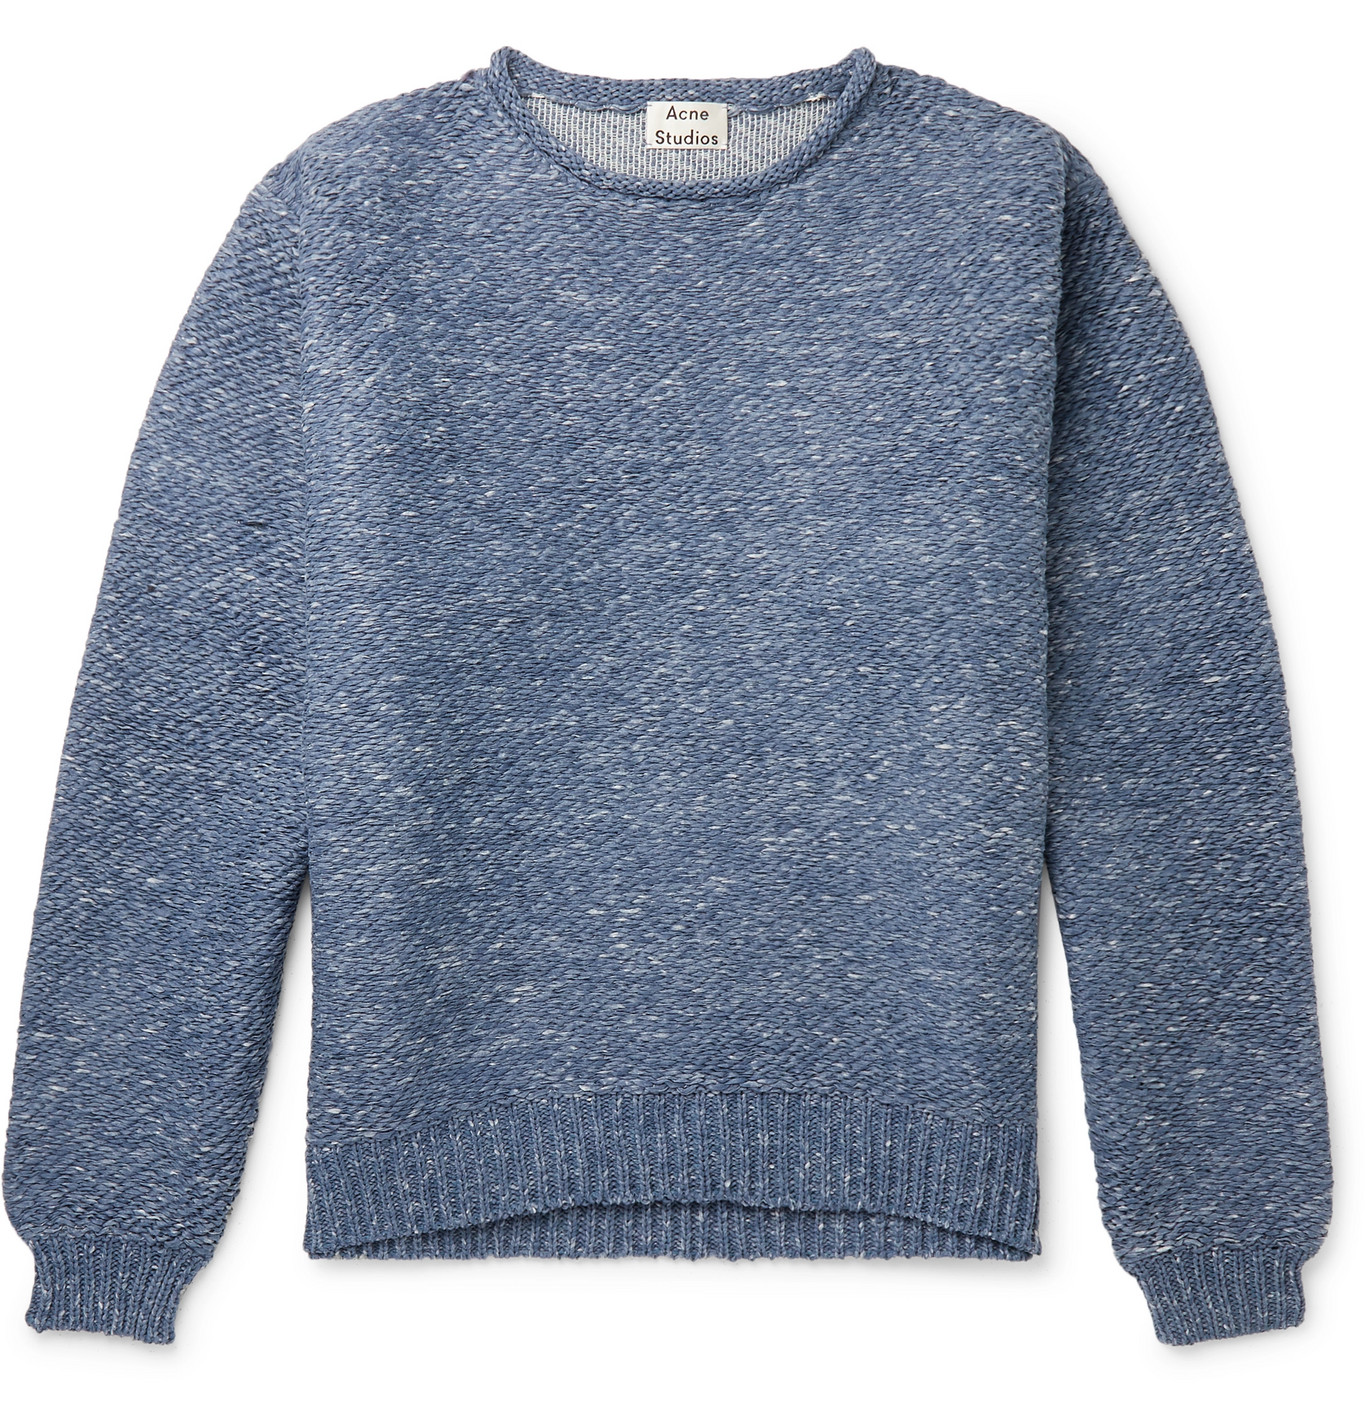 Acne Studios - Oversized Mélange Knitted Sweater - Men - Blue | The ...